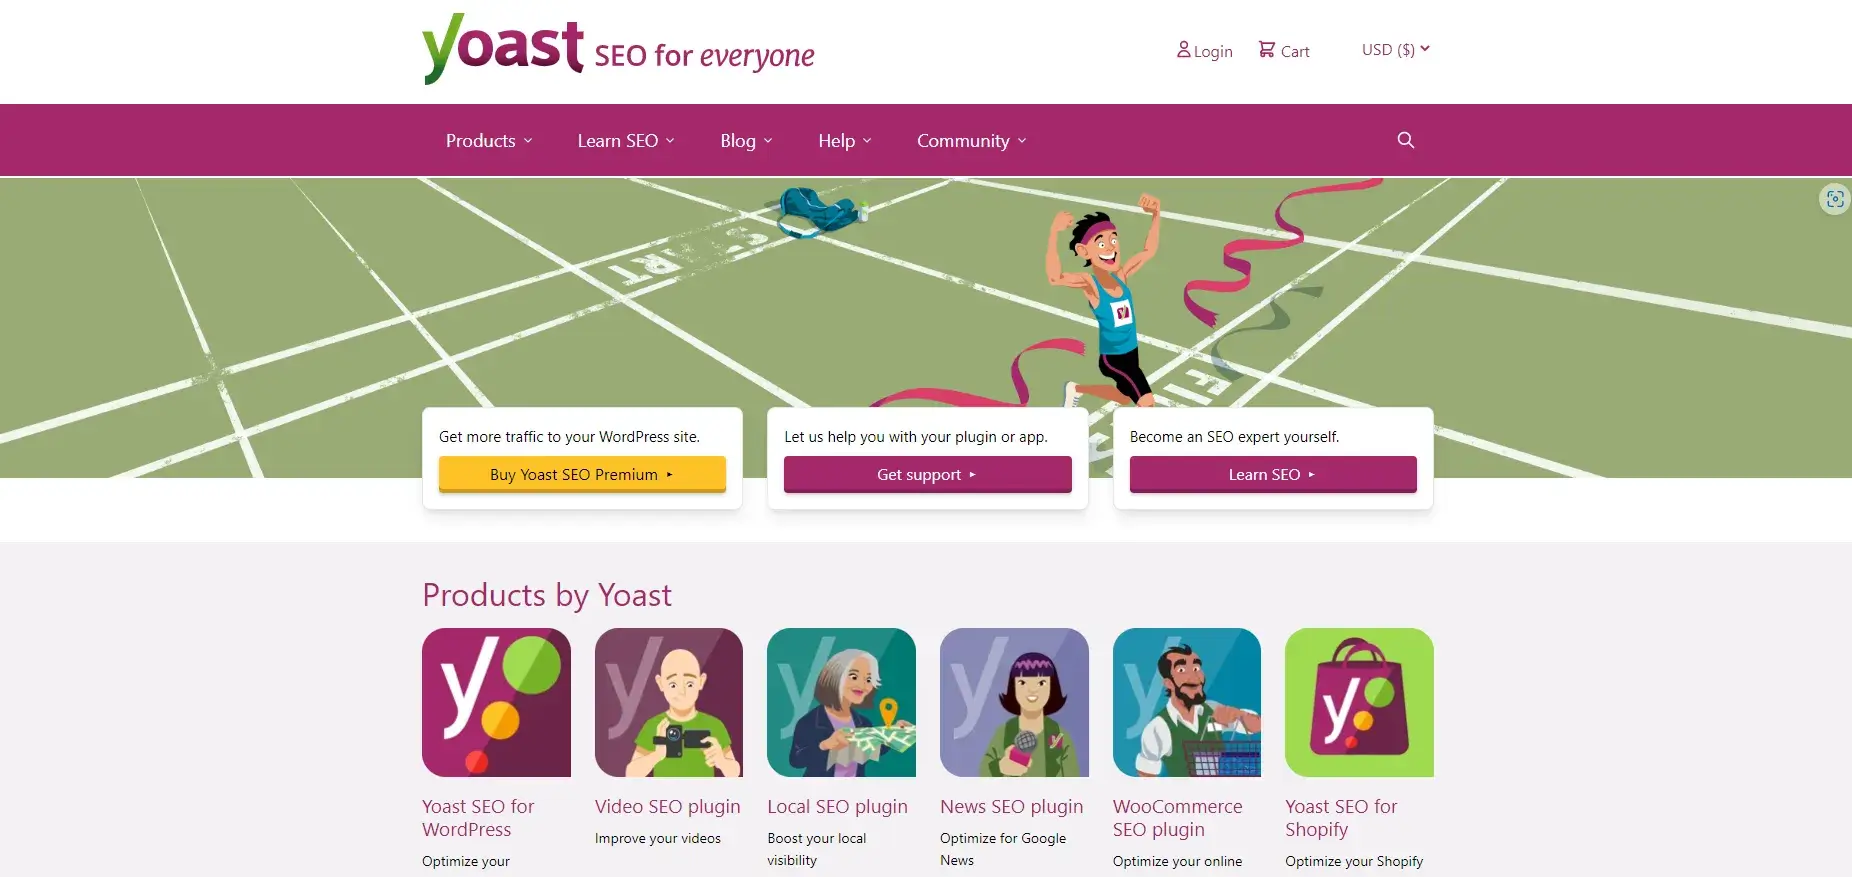 Products to Review: Yoast-SEO